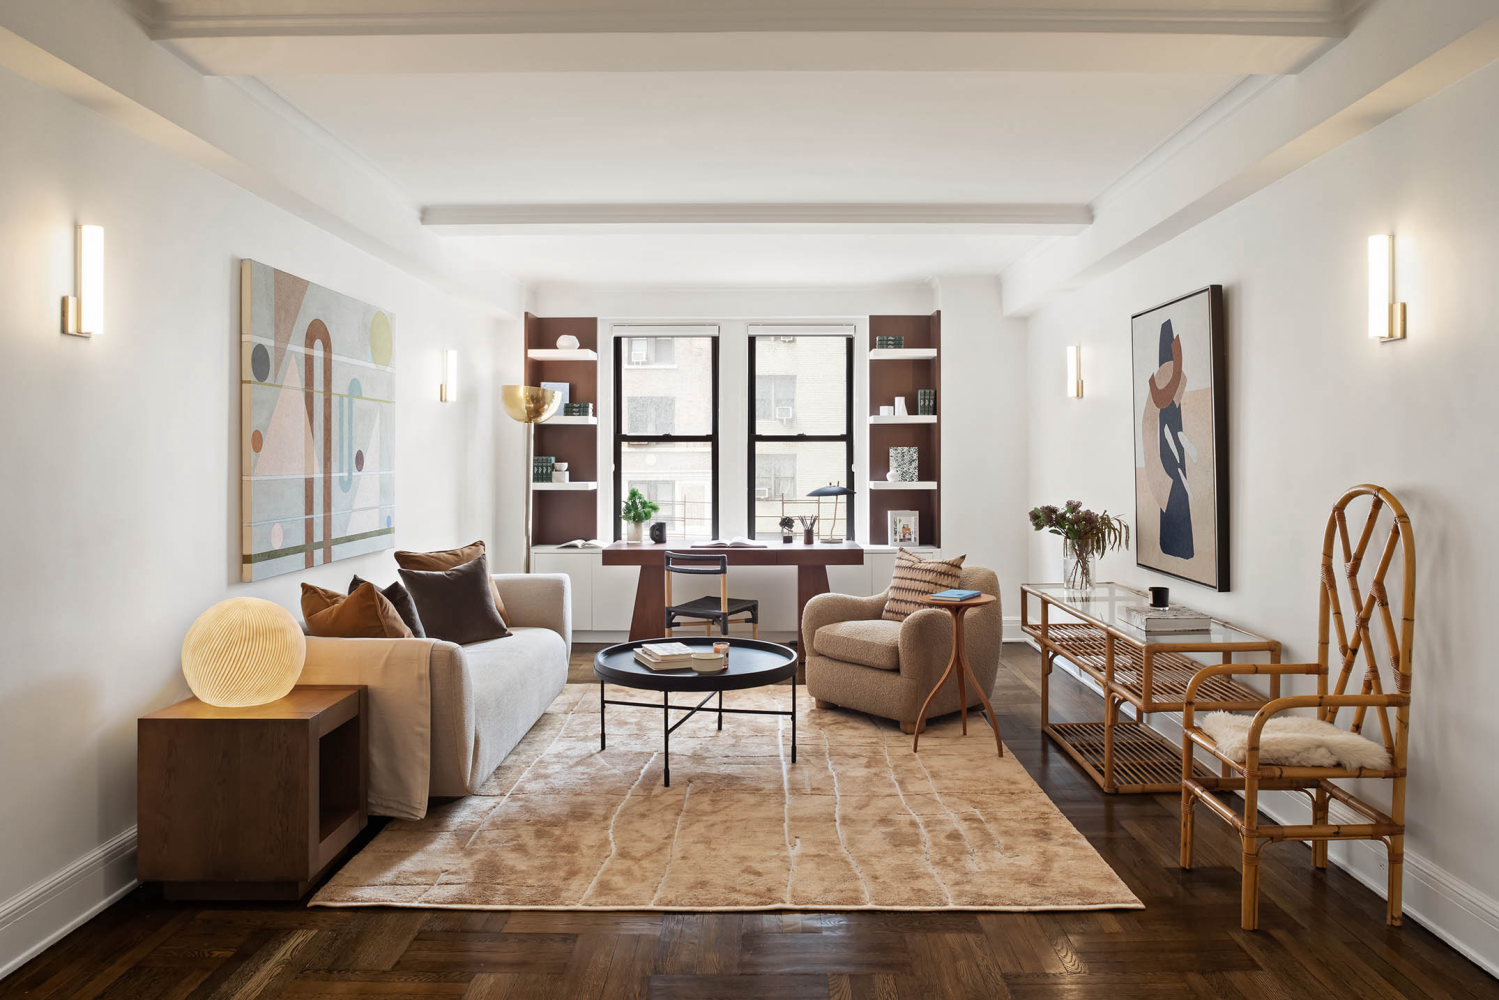 260 West End Avenue 4B, Lincoln Sq, Upper West Side, NYC - 2 Bedrooms  
2 Bathrooms  
5 Rooms - 